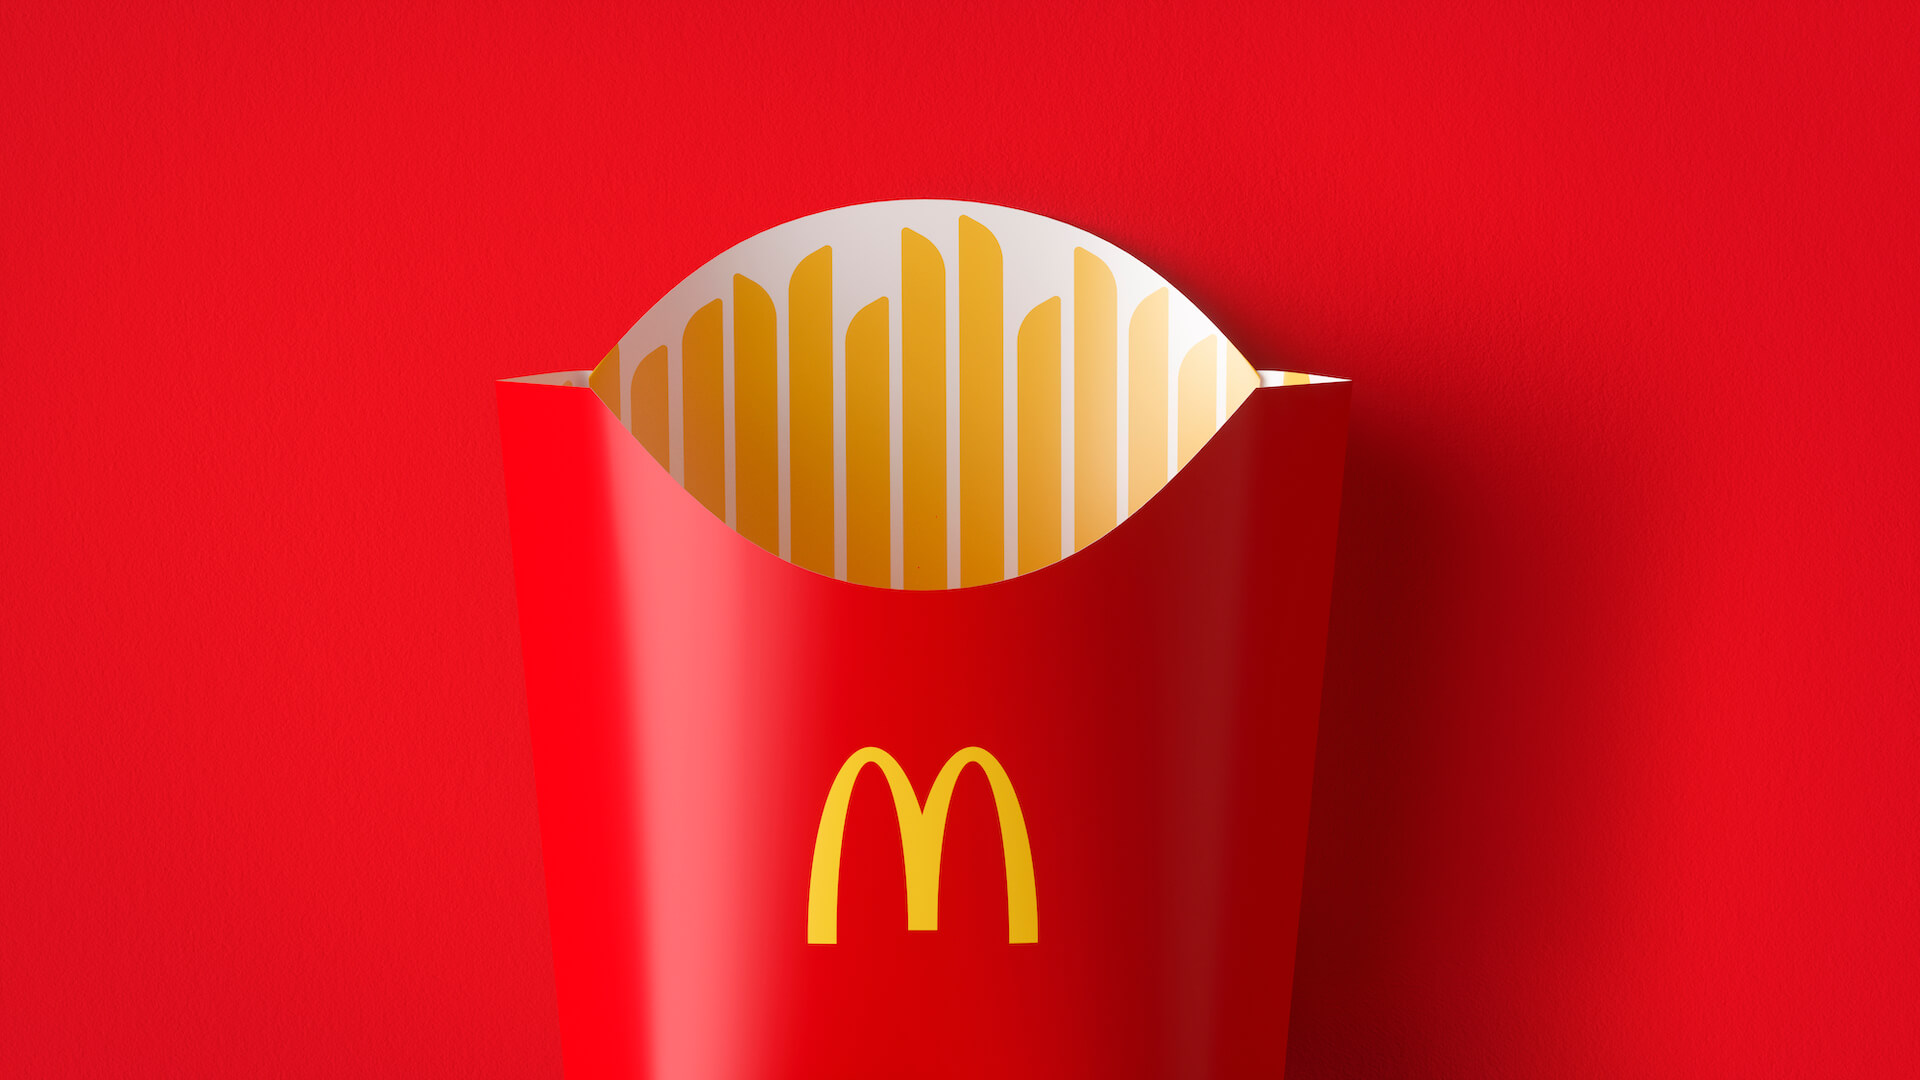 Pearlfisher Redesigns McDonald’s’ Global Packaging System